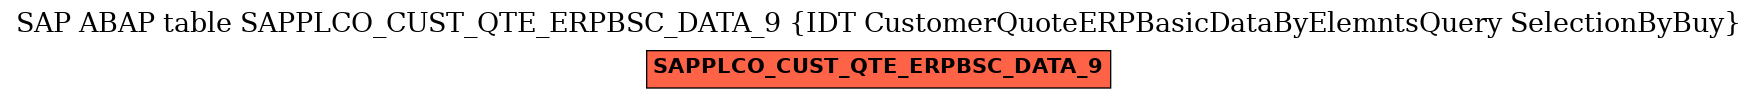 E-R Diagram for table SAPPLCO_CUST_QTE_ERPBSC_DATA_9 (IDT CustomerQuoteERPBasicDataByElemntsQuery SelectionByBuy)